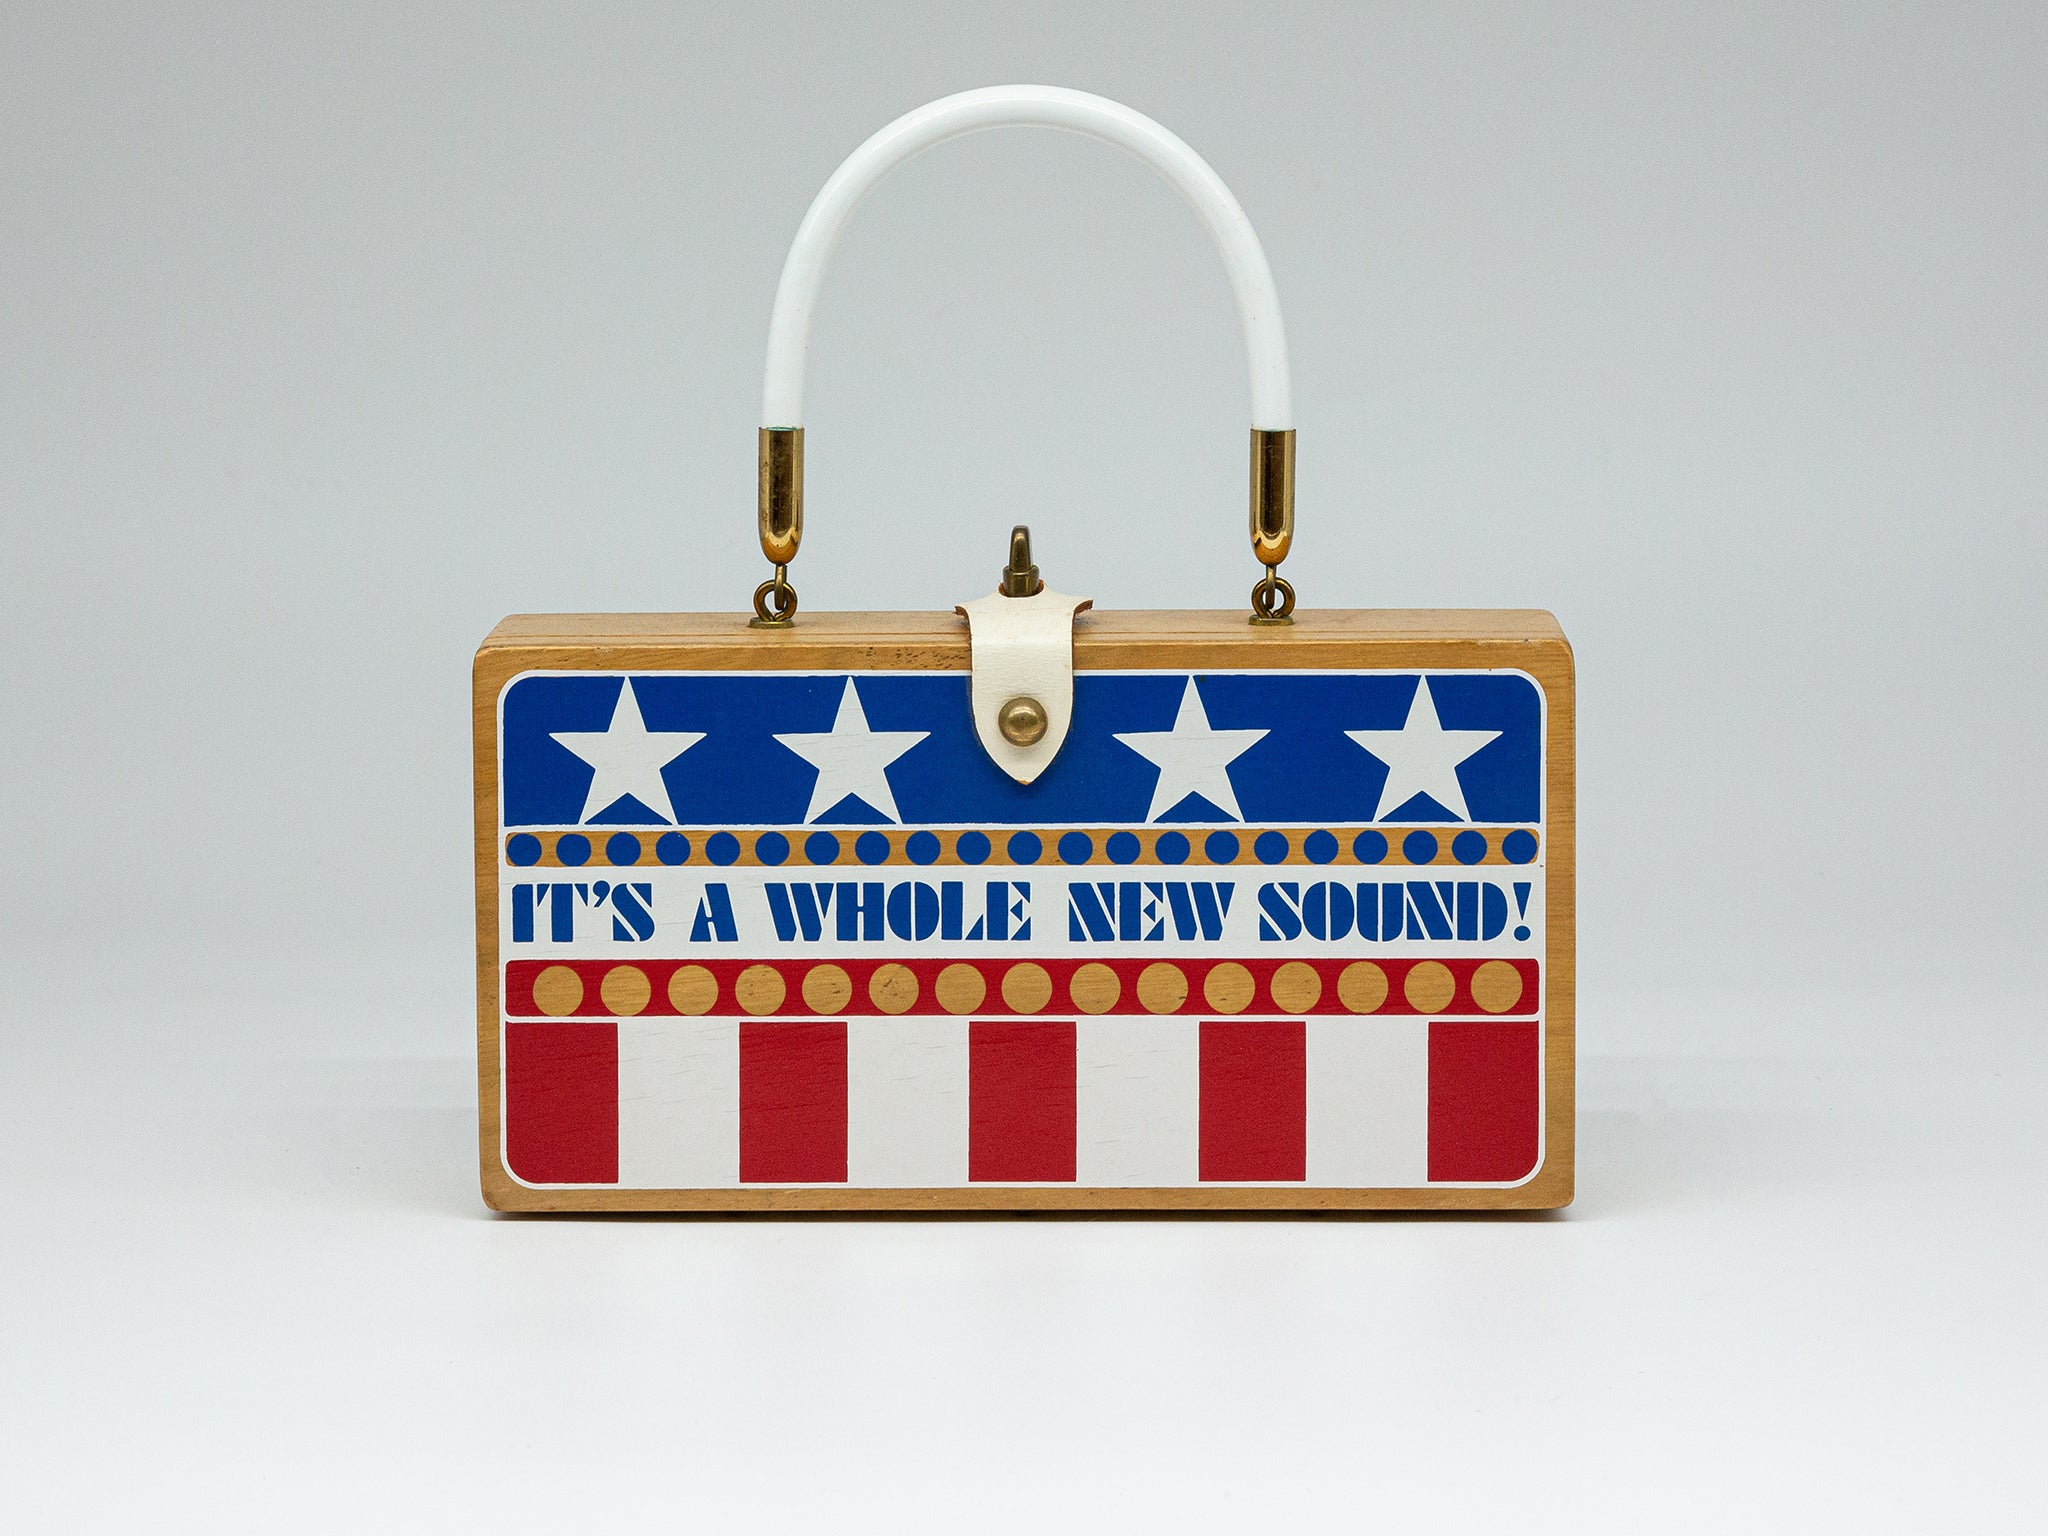 Collins’s bags became famous for their ‘conversation starter’ slogans